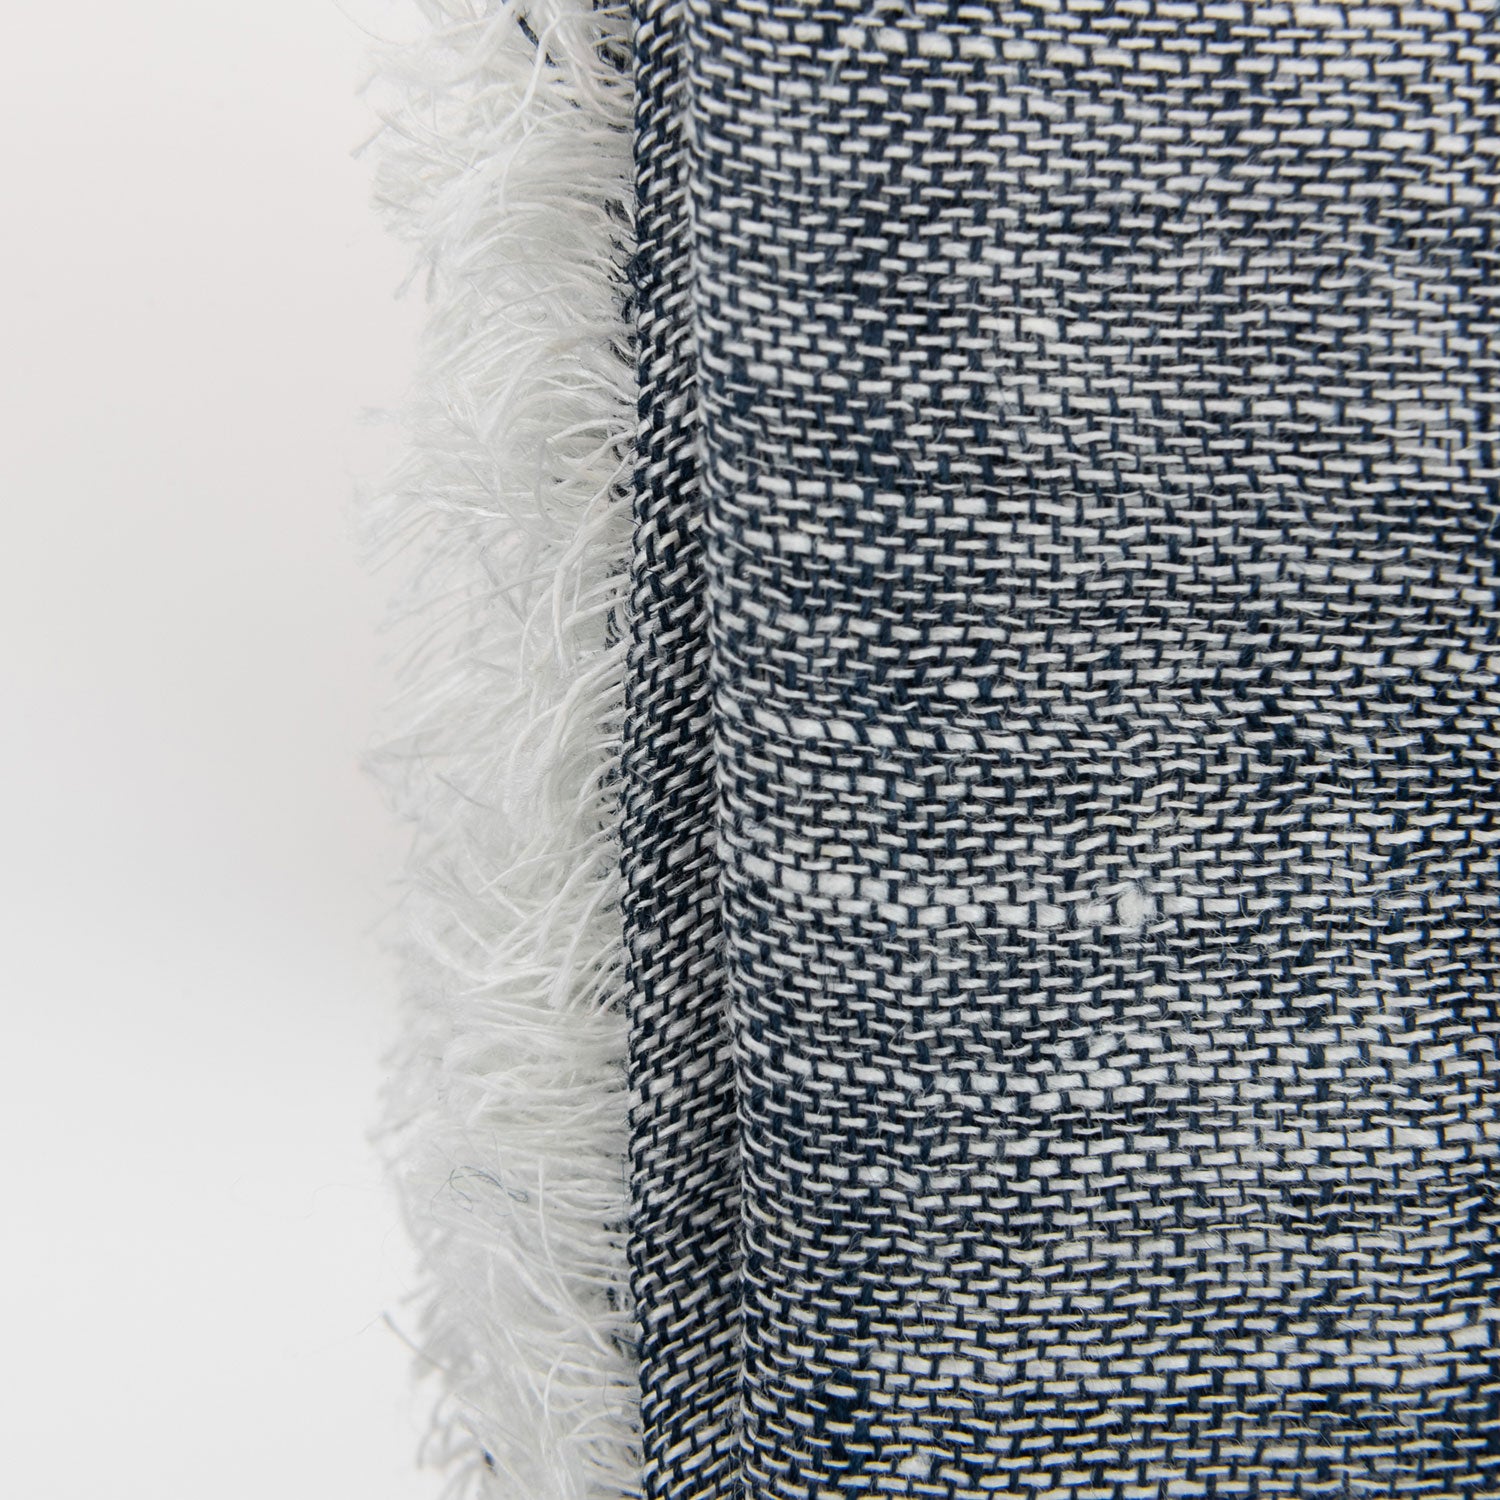 A close-up photo of the denim blue linen scarf on a white background.